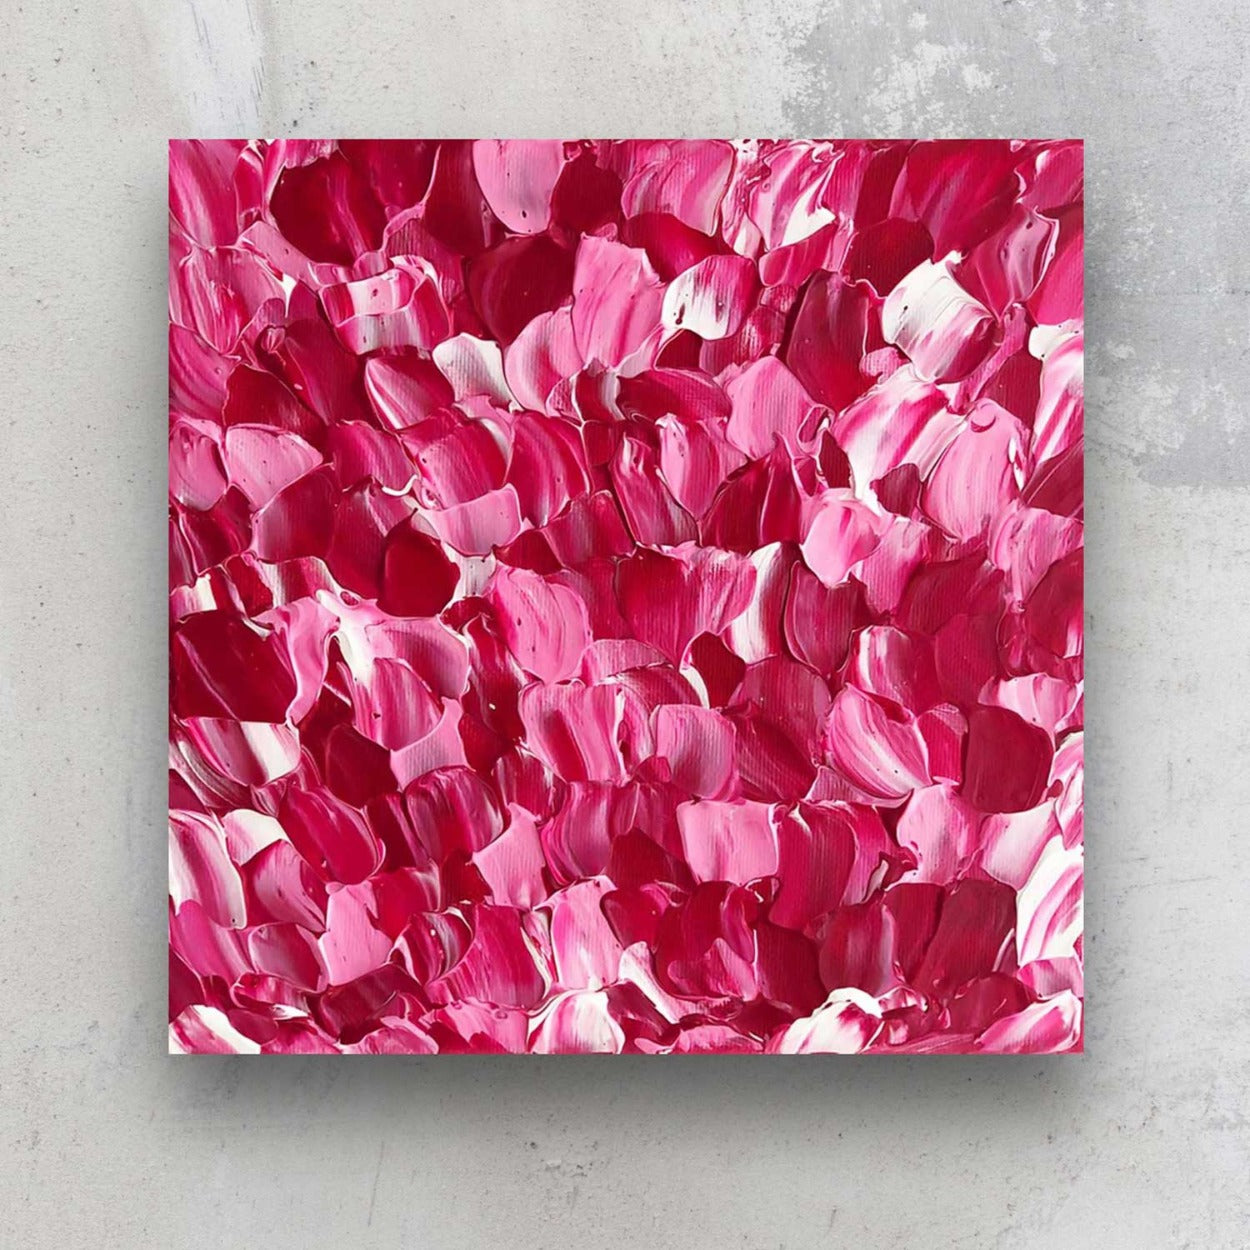 1000 Roses, original abstract art on canvas, reds, whites and pink palette. Painted by Bridget Bradley